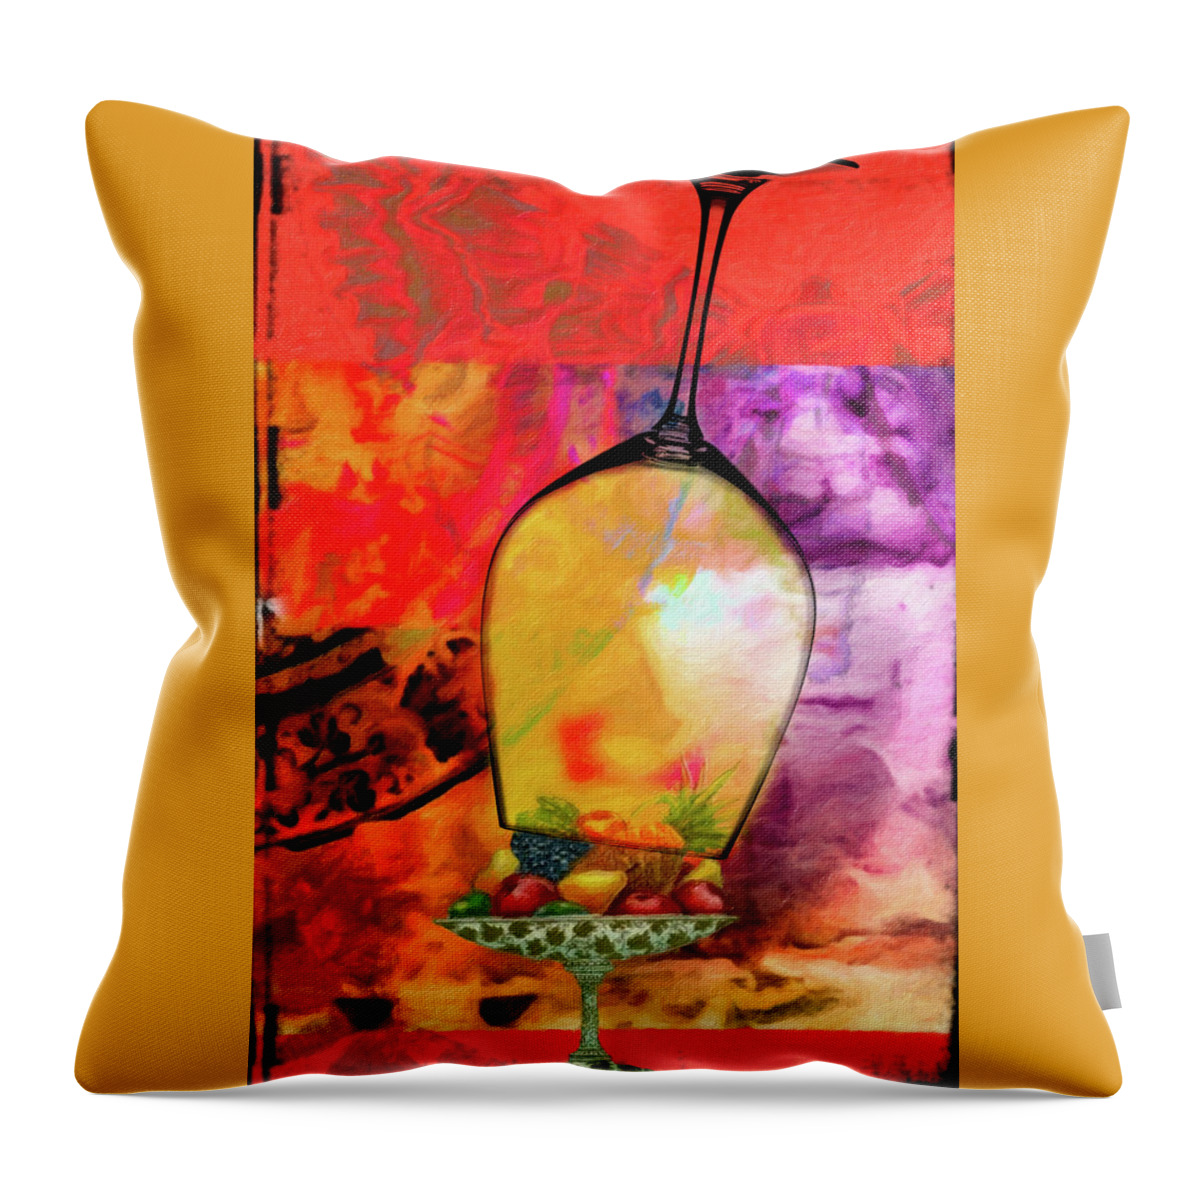 Wine Throw Pillow featuring the mixed media Wine Pairings 8 by Priscilla Huber